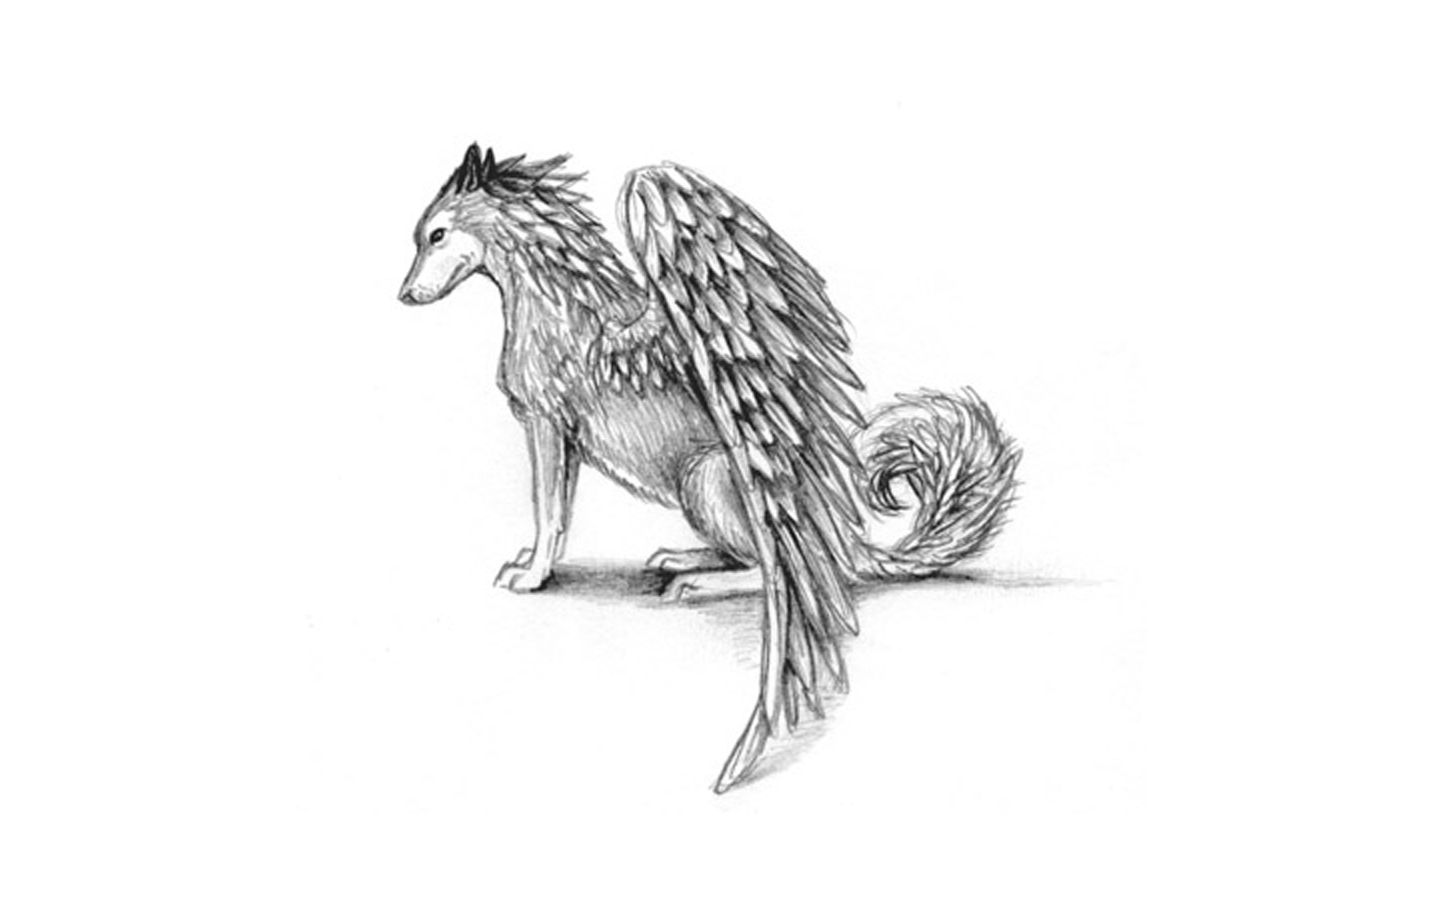 wings drawings wolves 1440x900 wallpaper High Quality Wallpaper, High Definition Wallpaper